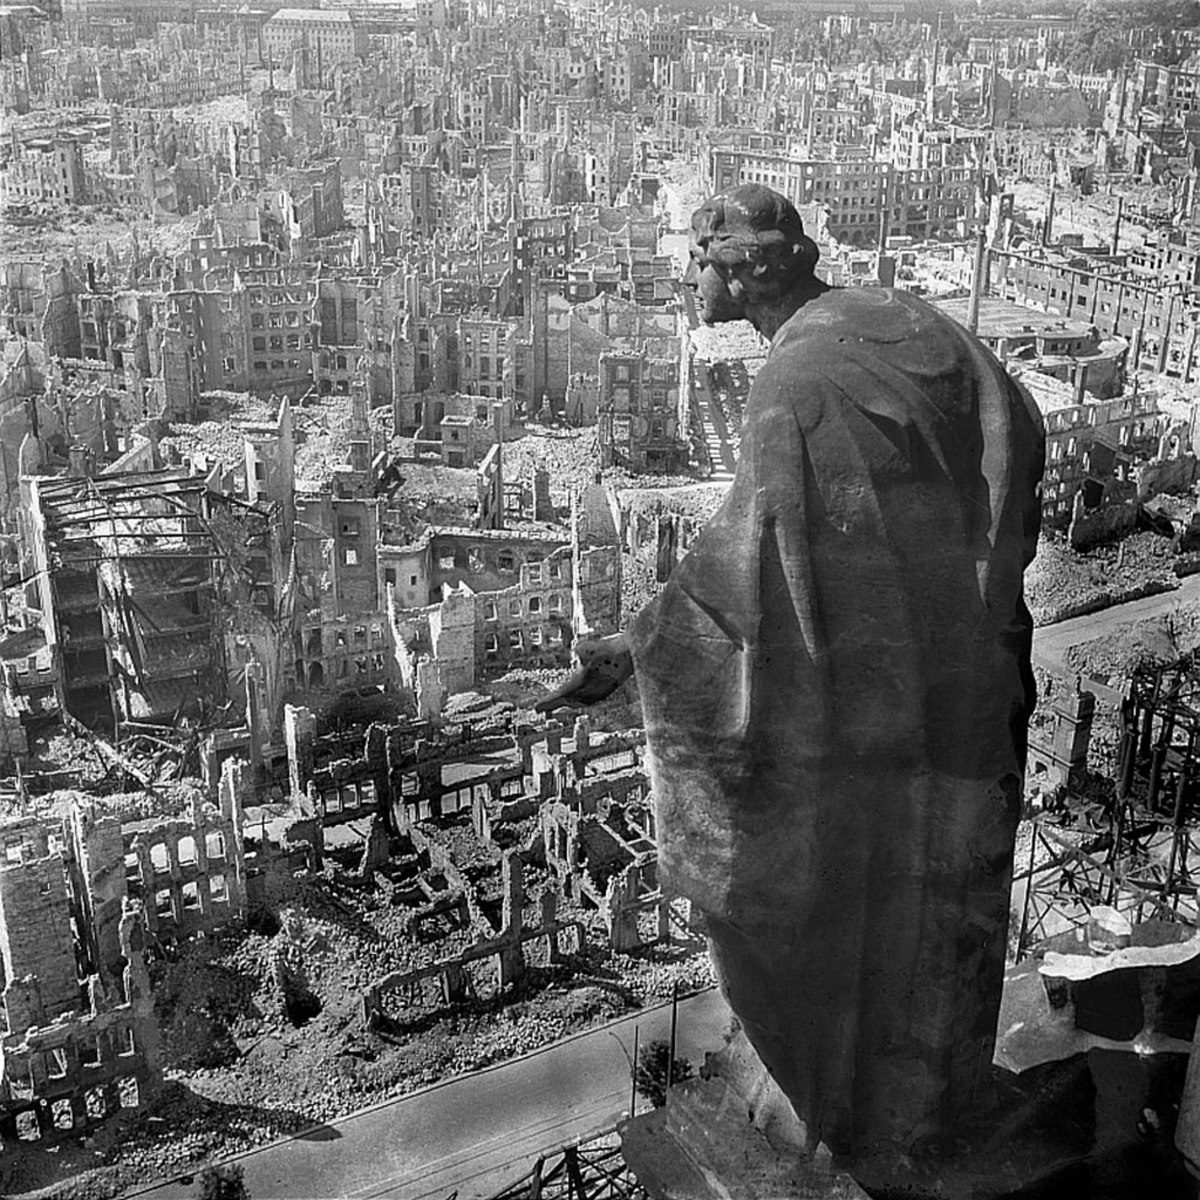 Target Dresden February 1945: A Tragic Moment in Modern History